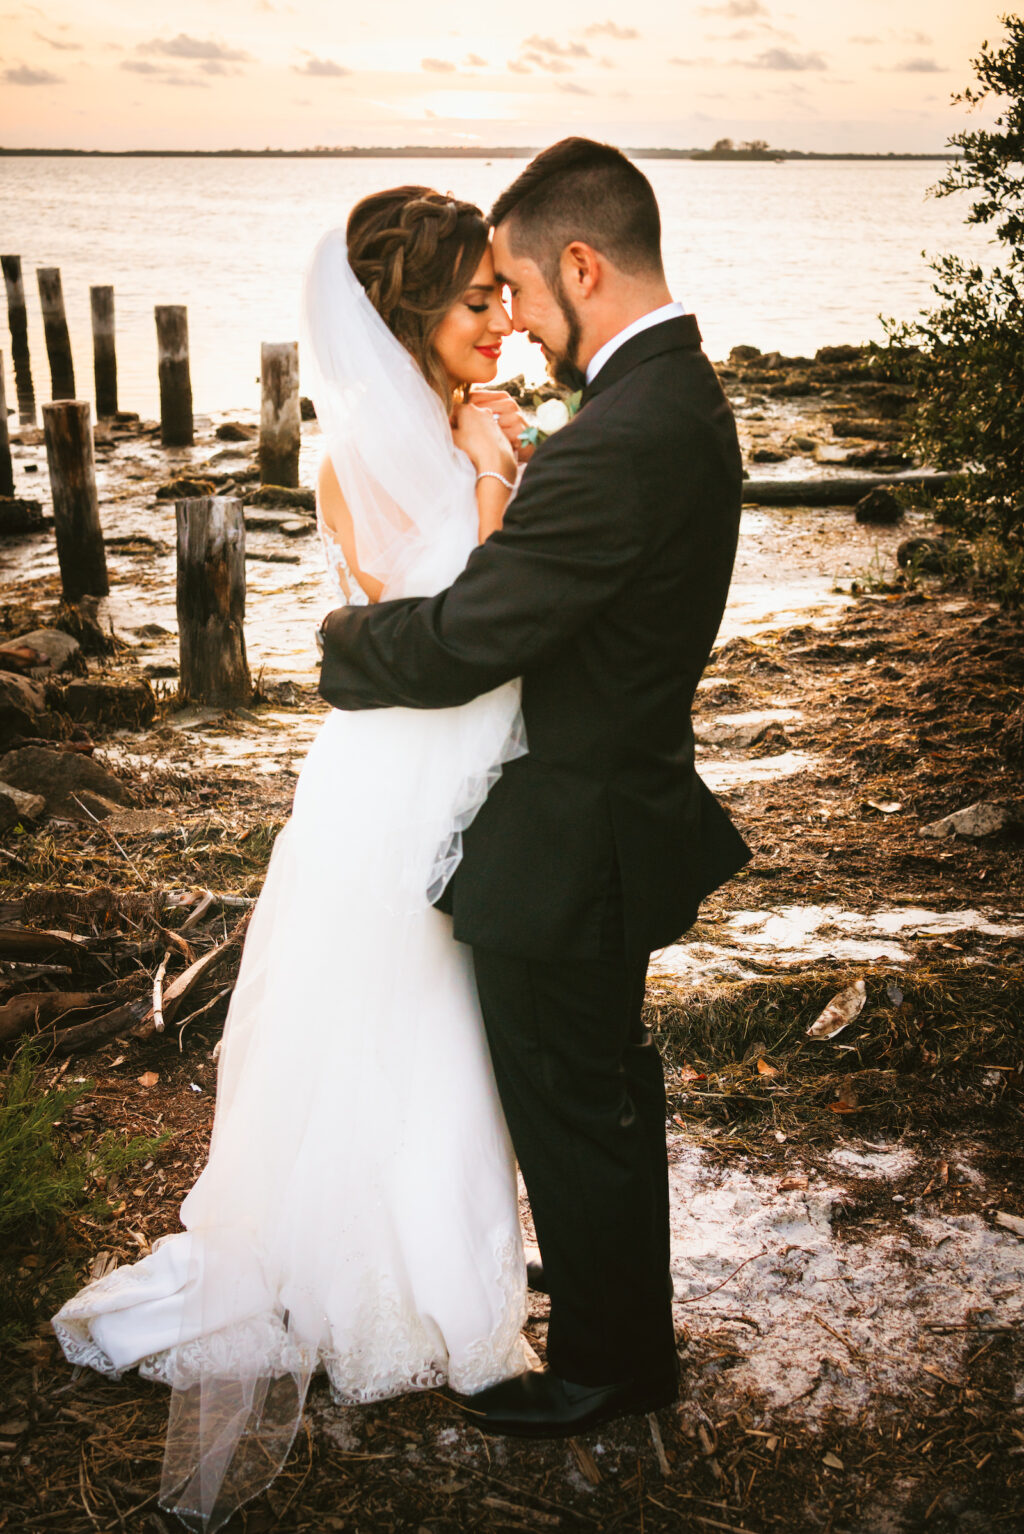 Florida bride with braided hair do, veil, red lipstick and groom waterfront wedding portrait | Tampa Bay wedding photographer Bonnie Newman Creative | Wedding hair and makeup Femme Akoi